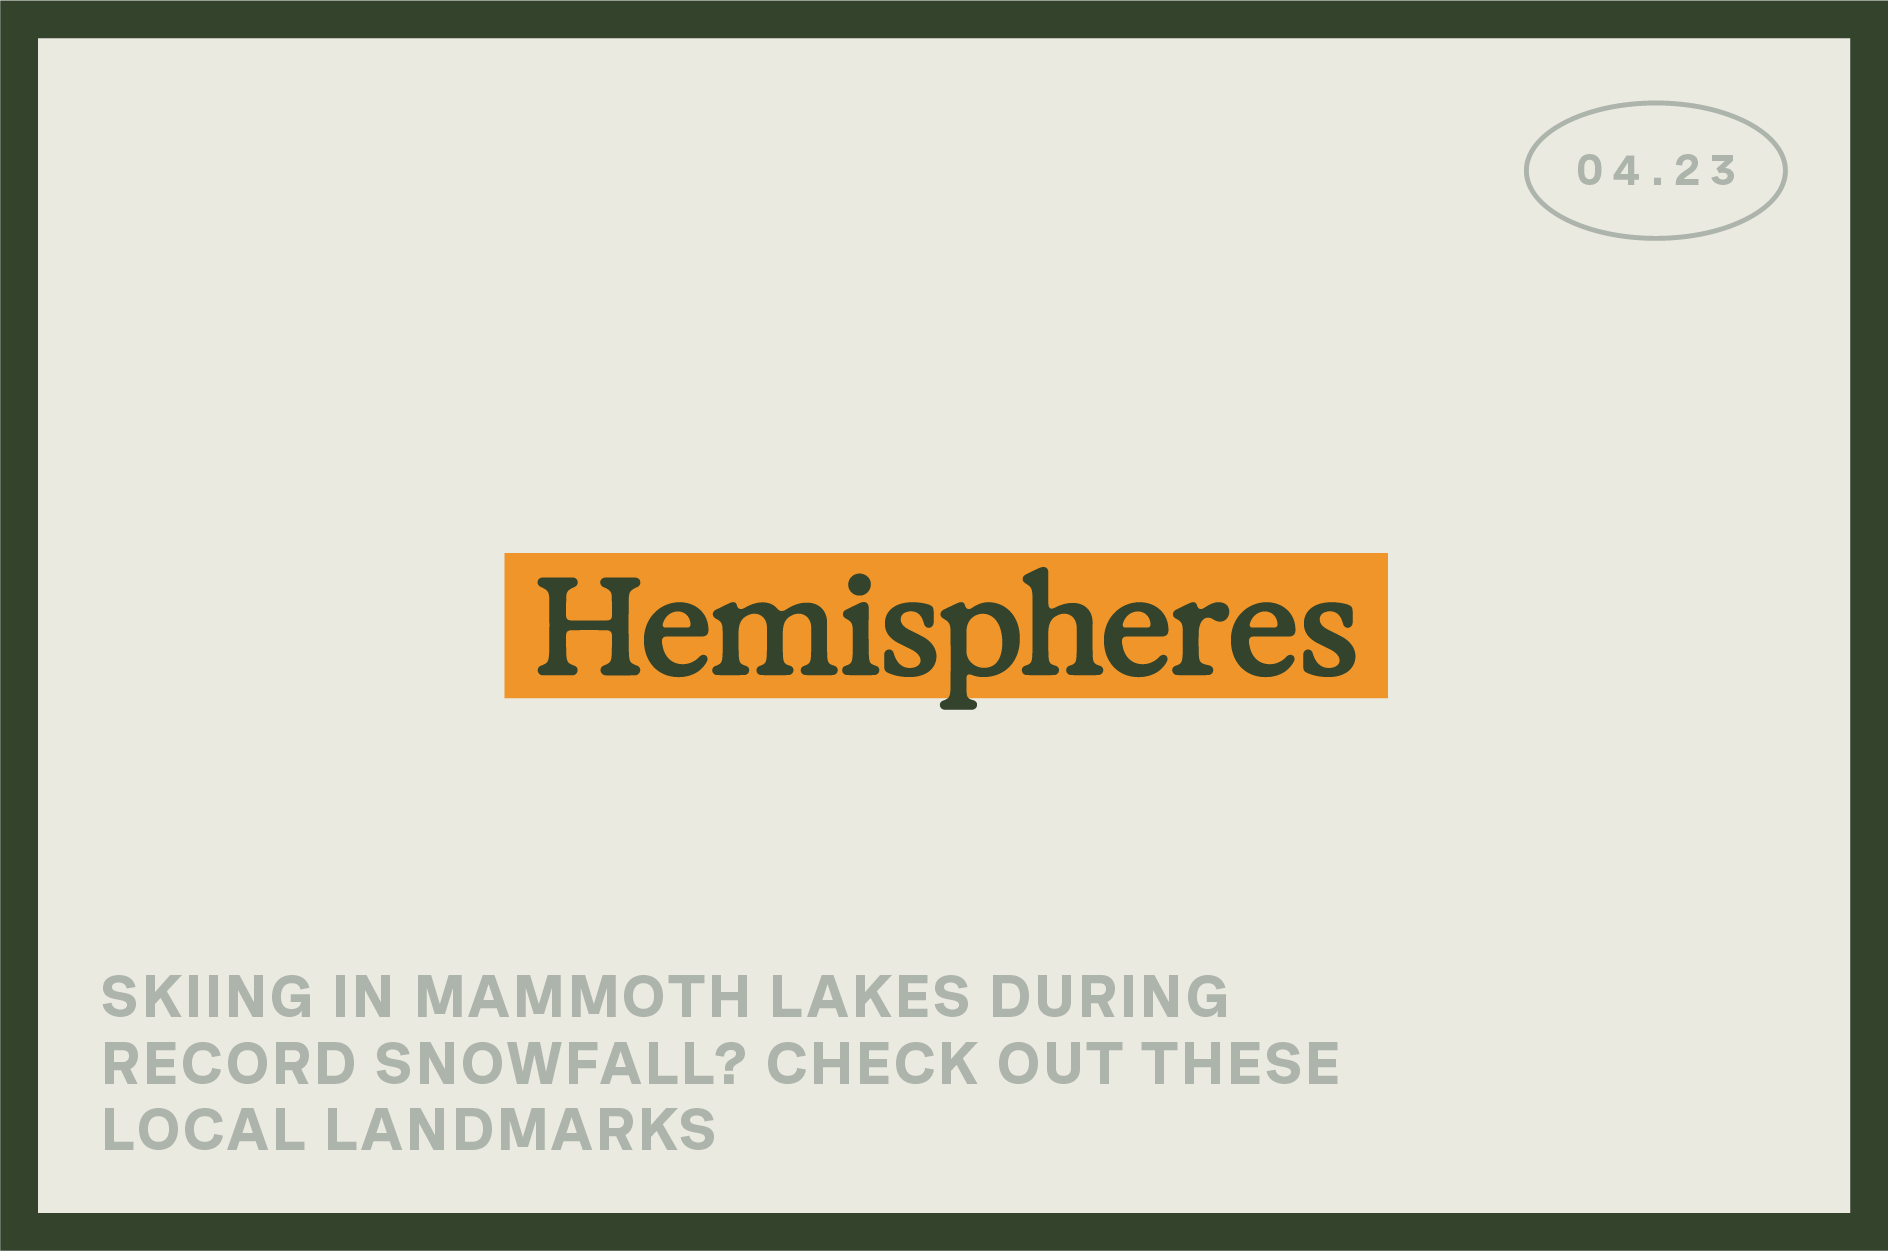 "Hemispheres" banner highlights "Skiing in Mammoth Lakes during record snowfall, featuring local landmarks".